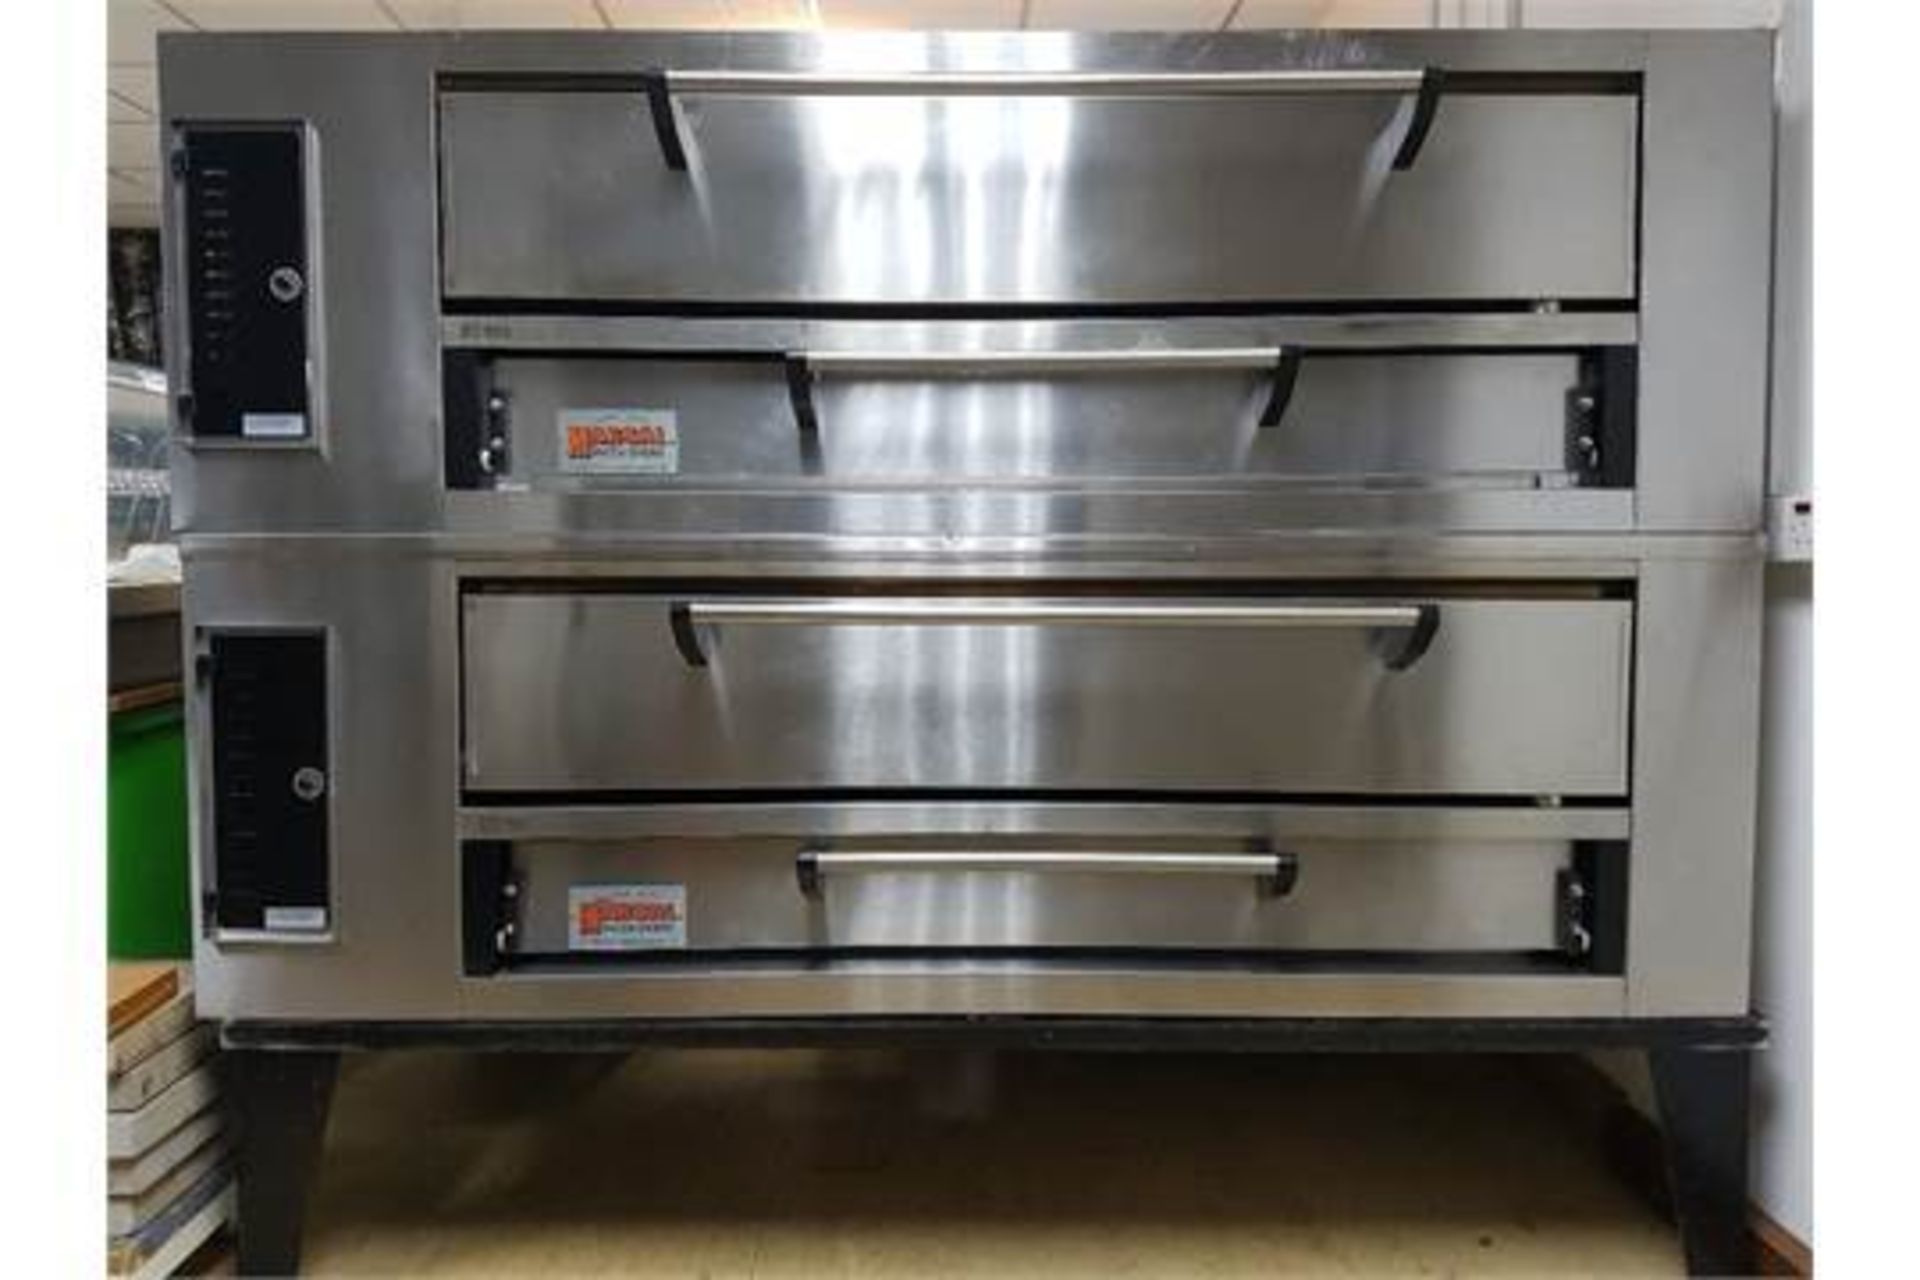 Marsal SD-660 Gas Deck Oven – Double Stack with Standing Stainless Steel – Bakes 12 x 18” Pizza - Image 2 of 2